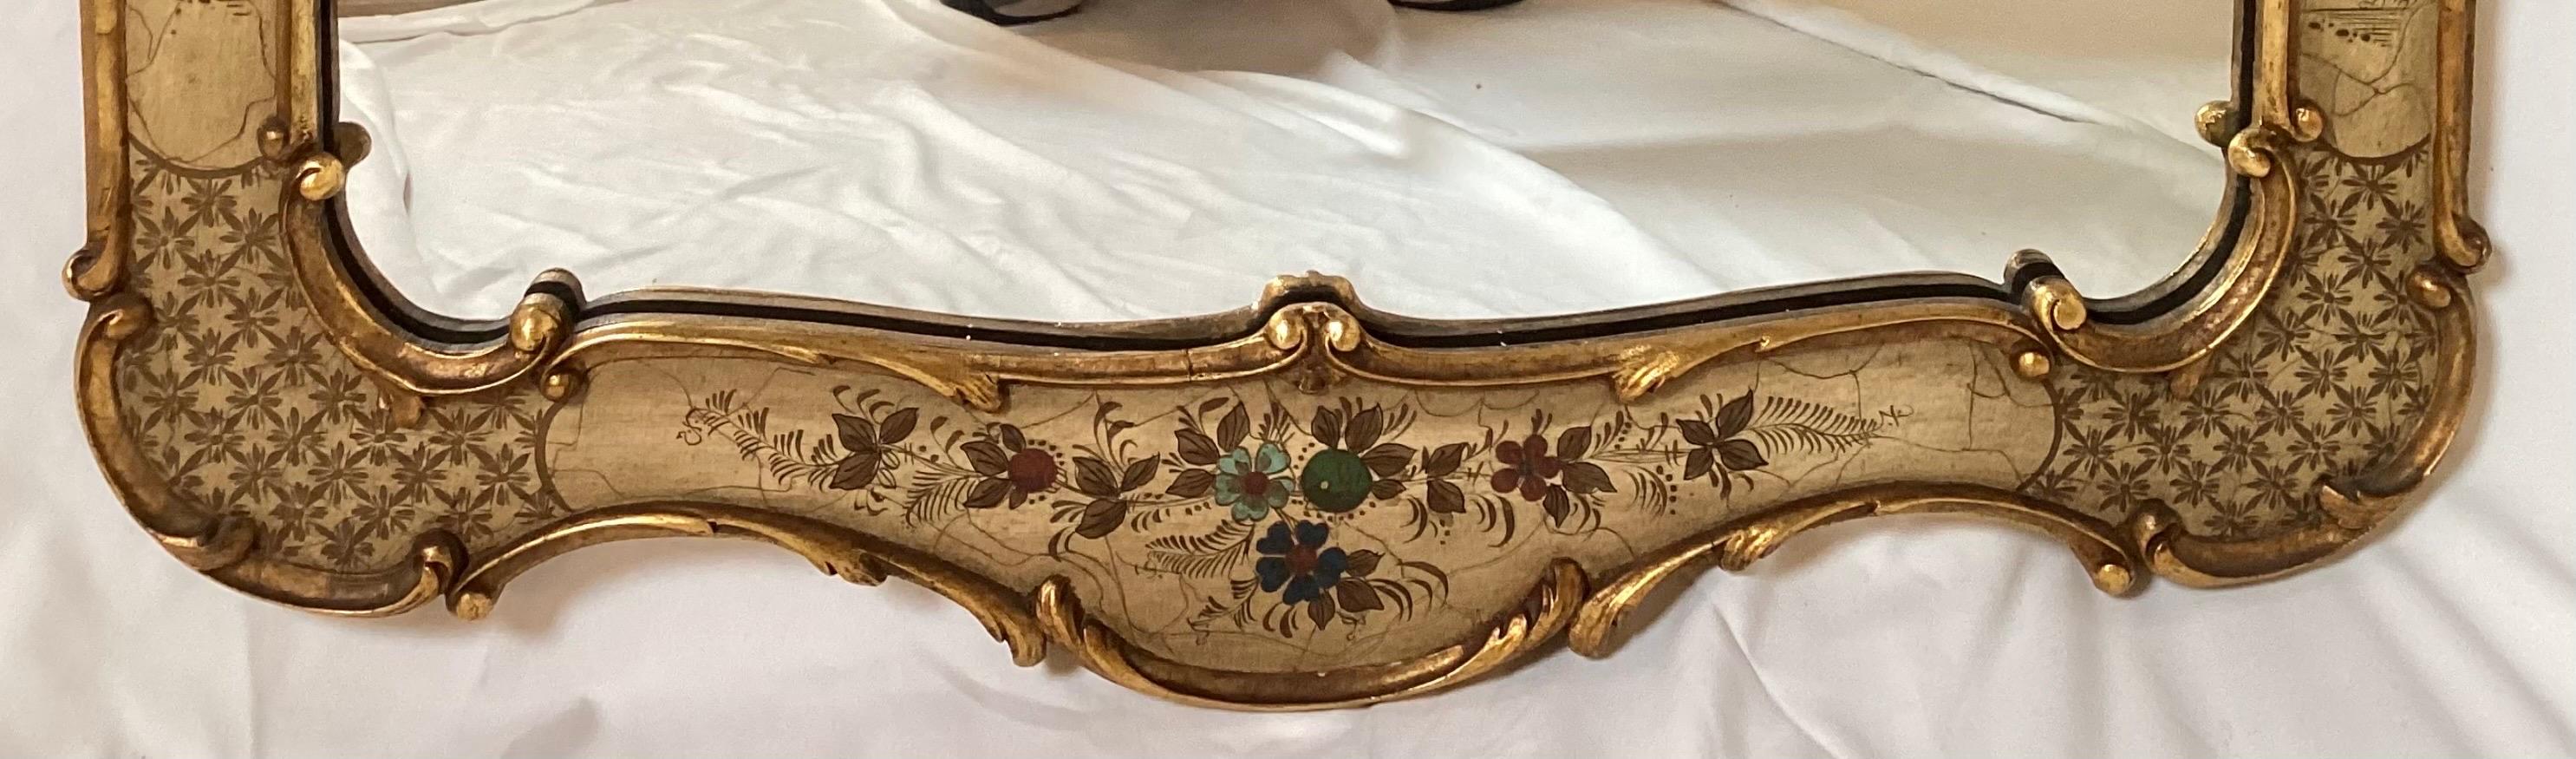 North American Hand Painted and Gilt Chinoiserie Famed Mirror  For Sale